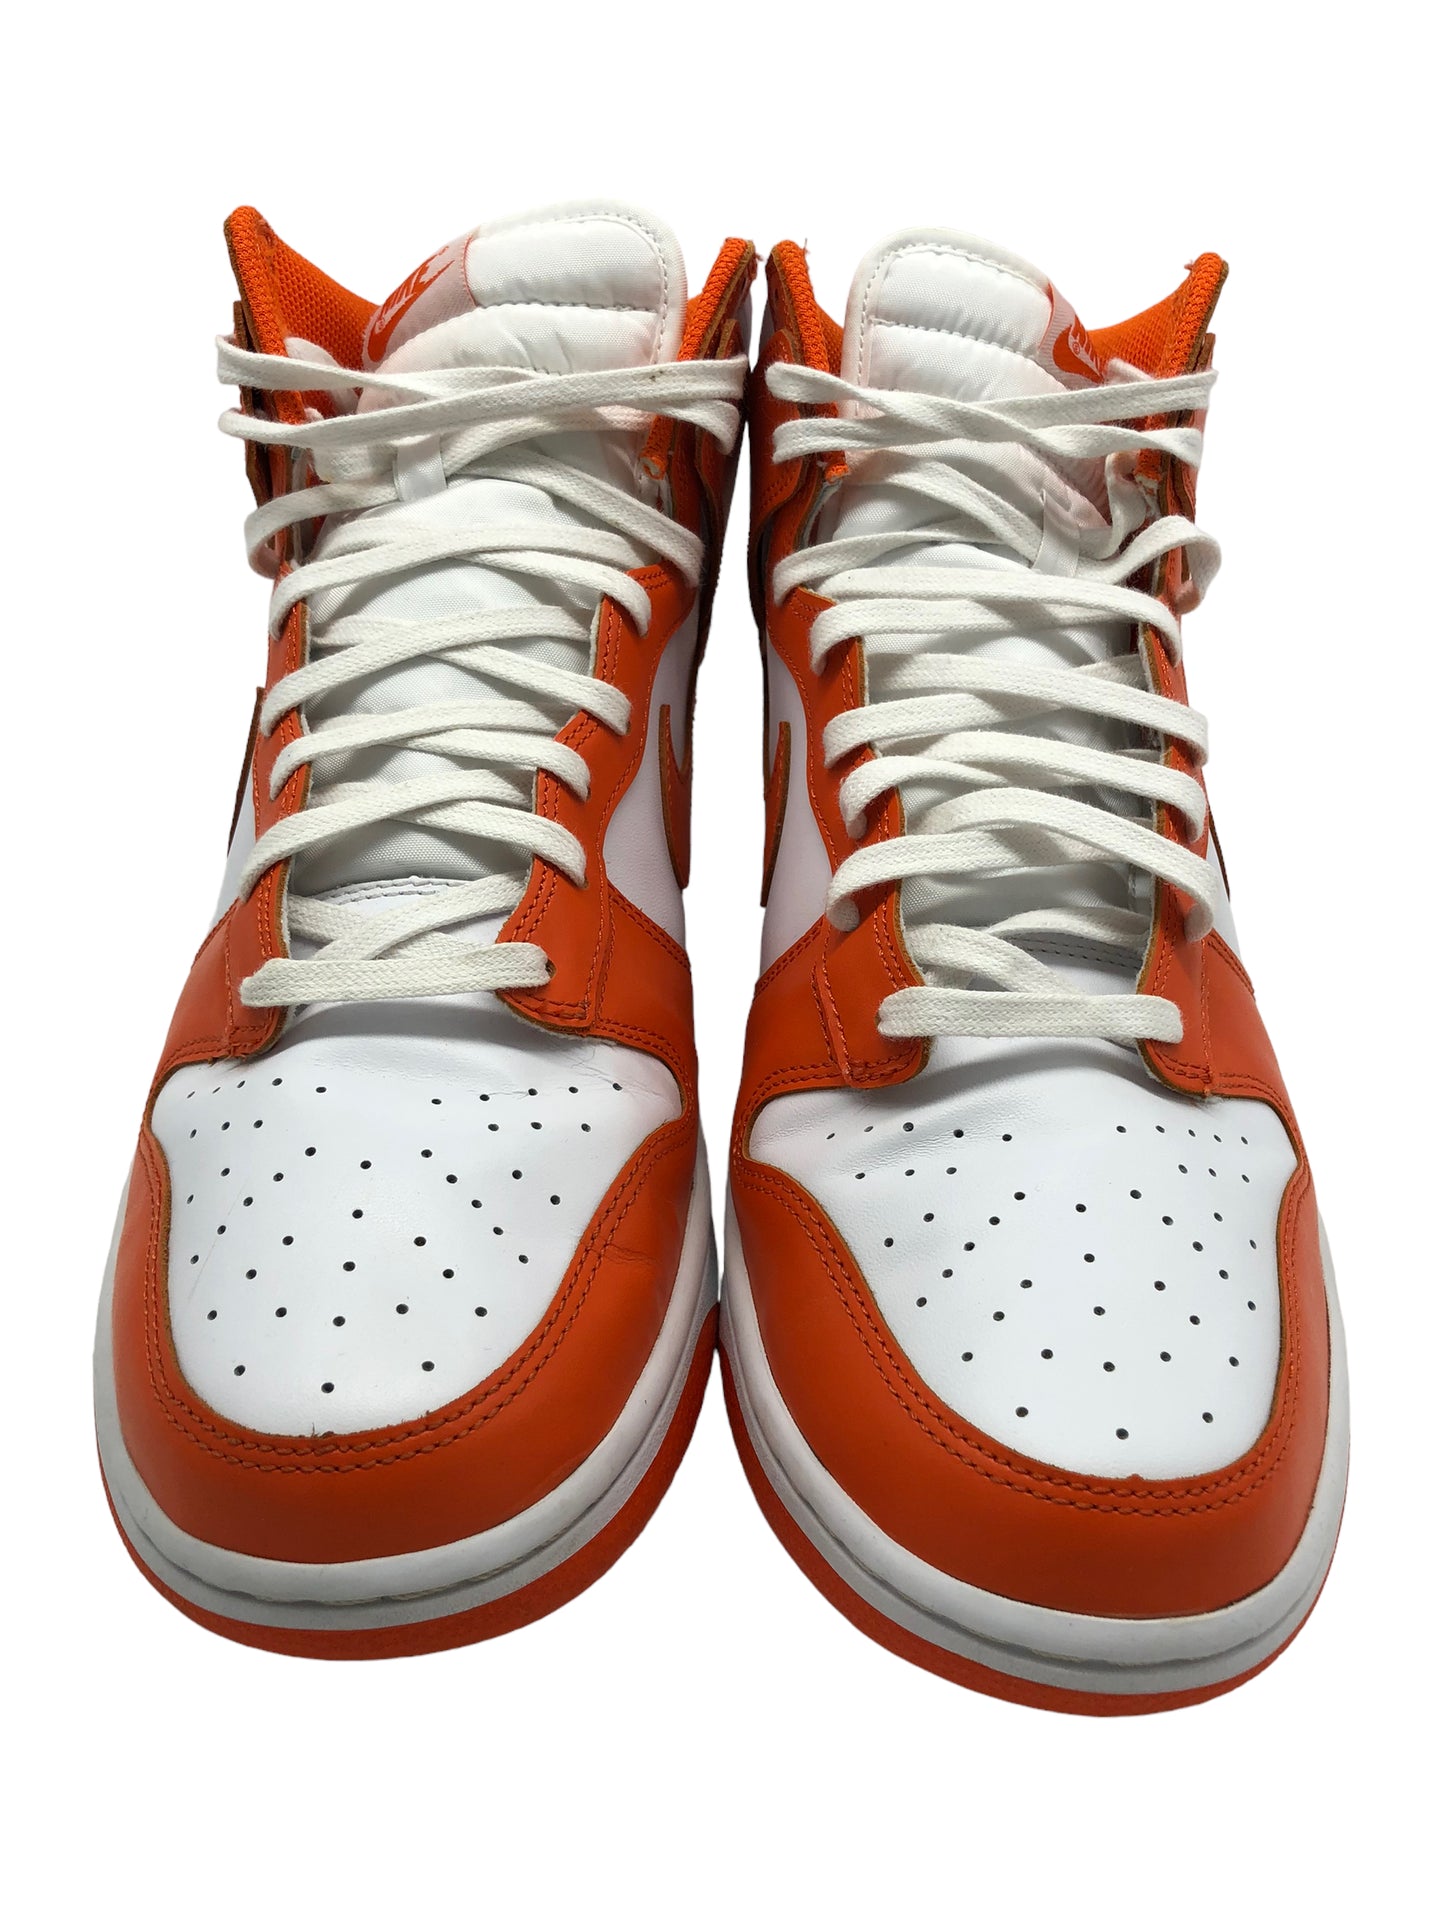 Load image into Gallery viewer, Preowned Nike Dunk High Syracuse (2021) Sz 13
